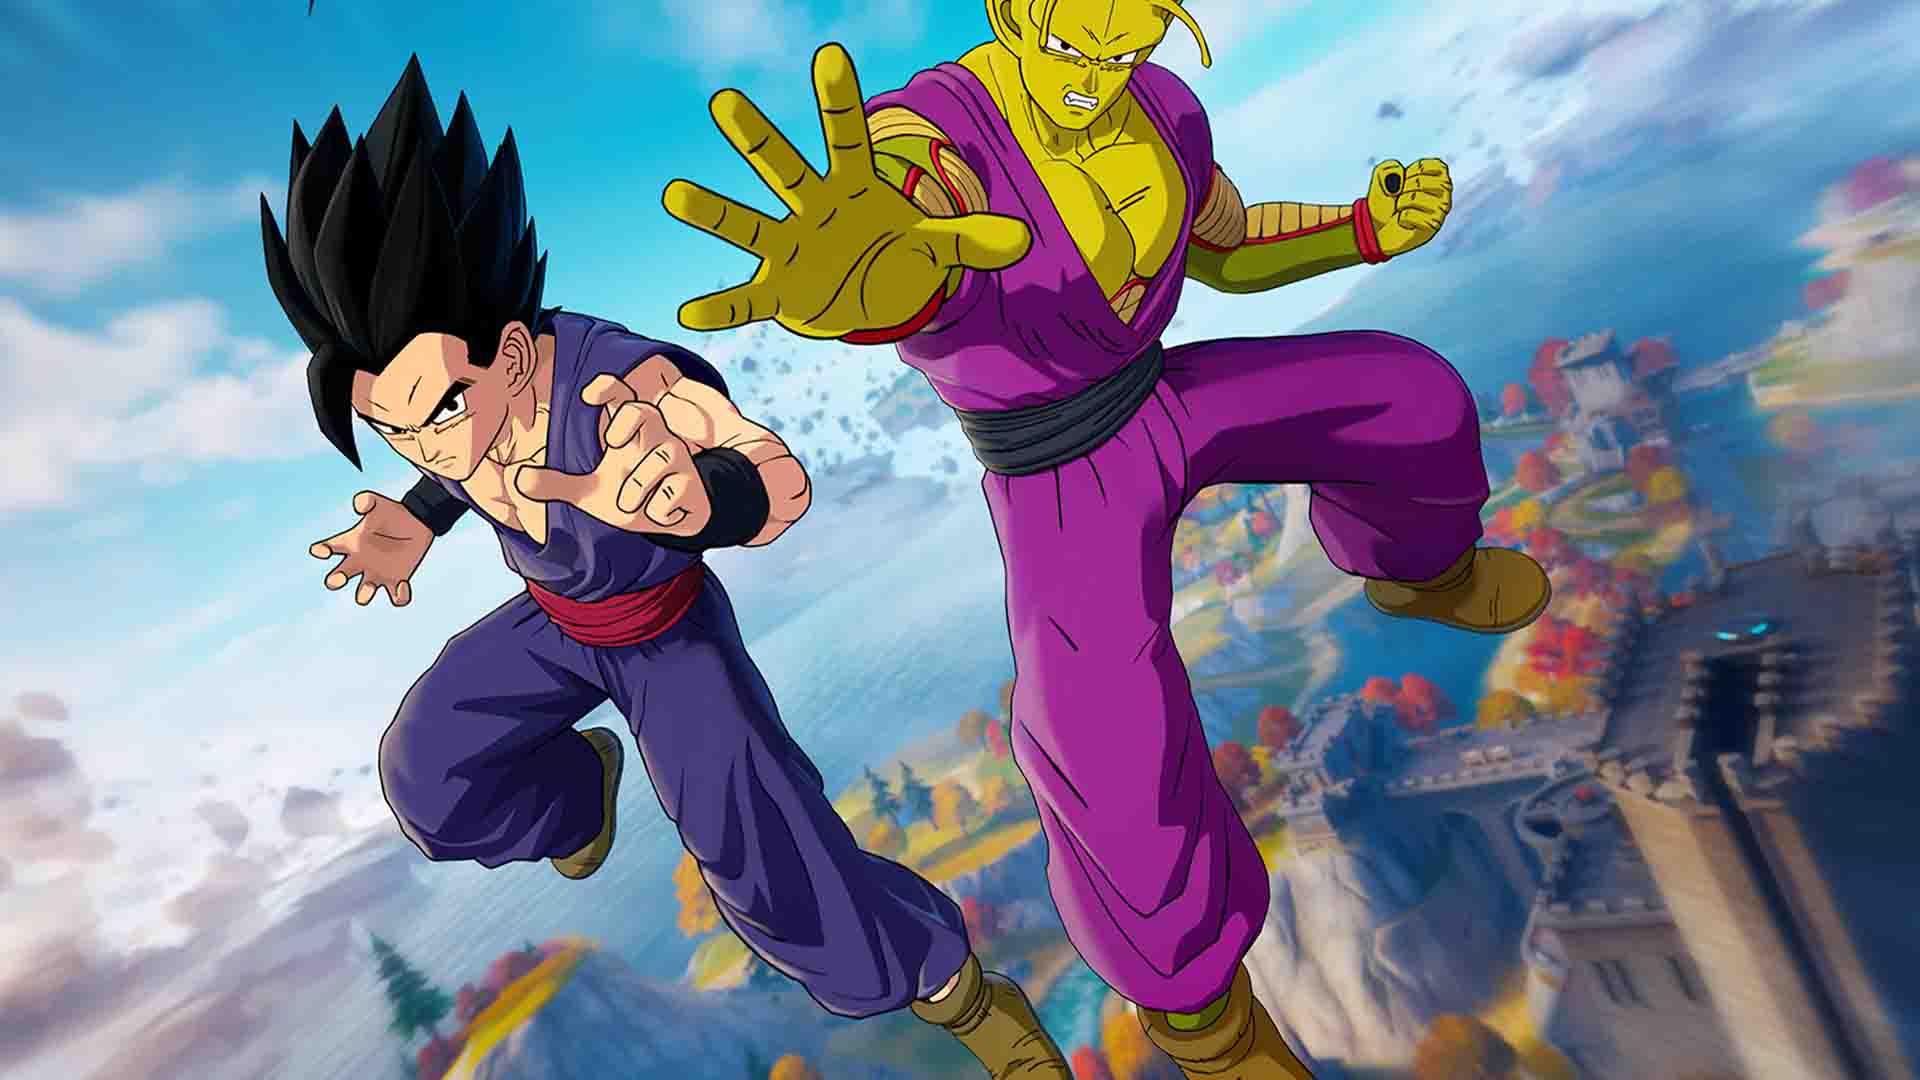 Dragon Ball: The Breakers Item code for January 5th